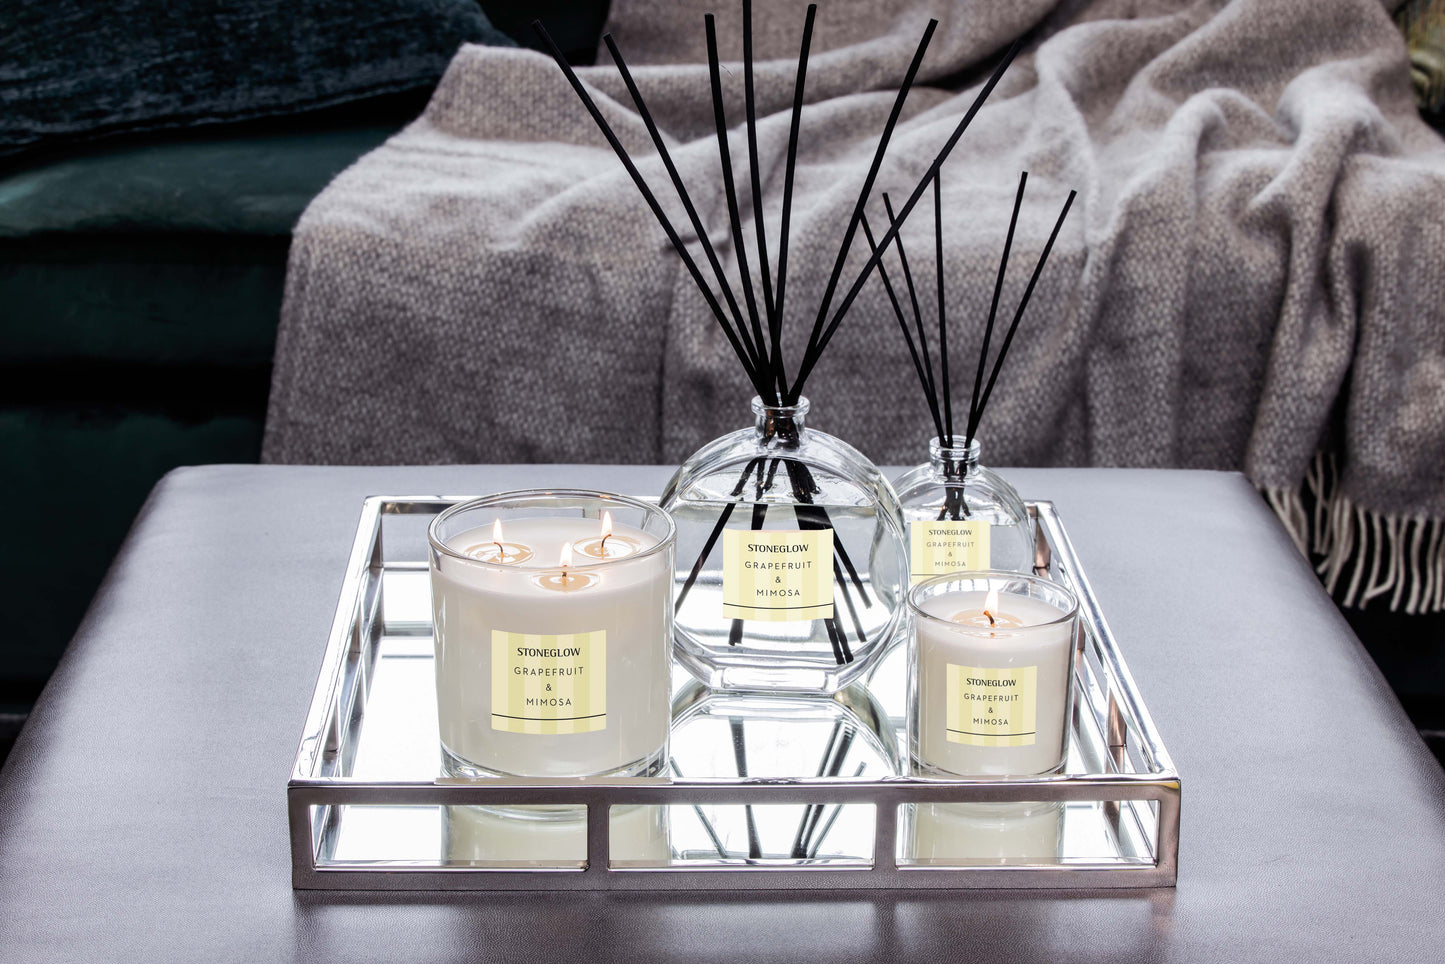 Stoneglow Modern Classics Collection Reed Diffuser, Grapefruit & Mimosa